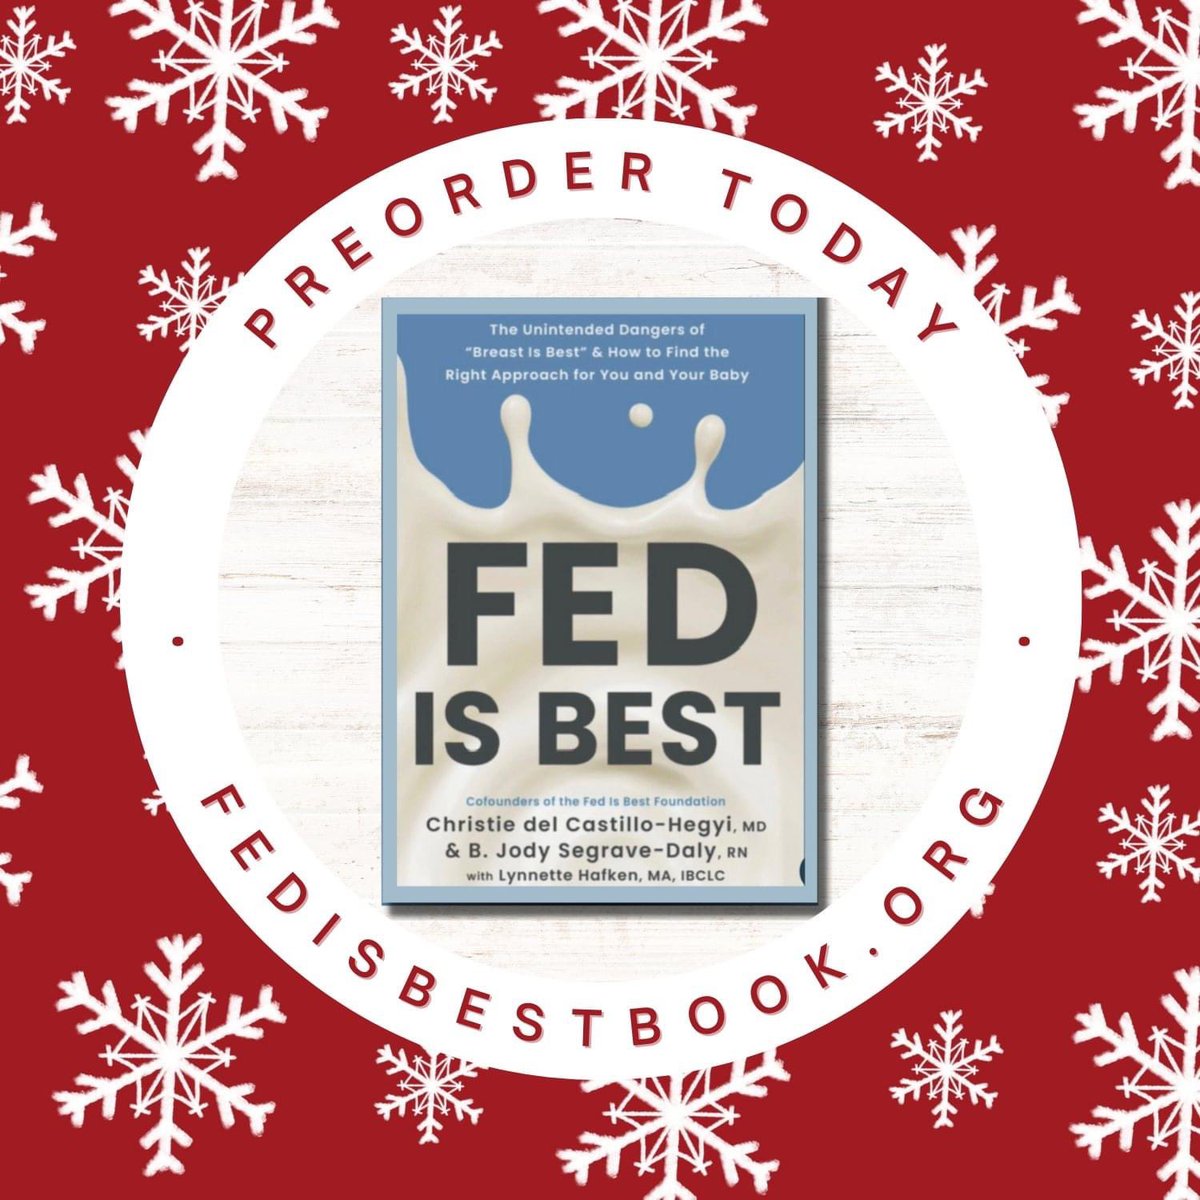 We’re thrilled to announce our book, coming out June 25! Preorder at Fedisbestbook.org #fedisbest #breastfeeding #combifeeding #babyformula #humanmilk #bottlefeeding